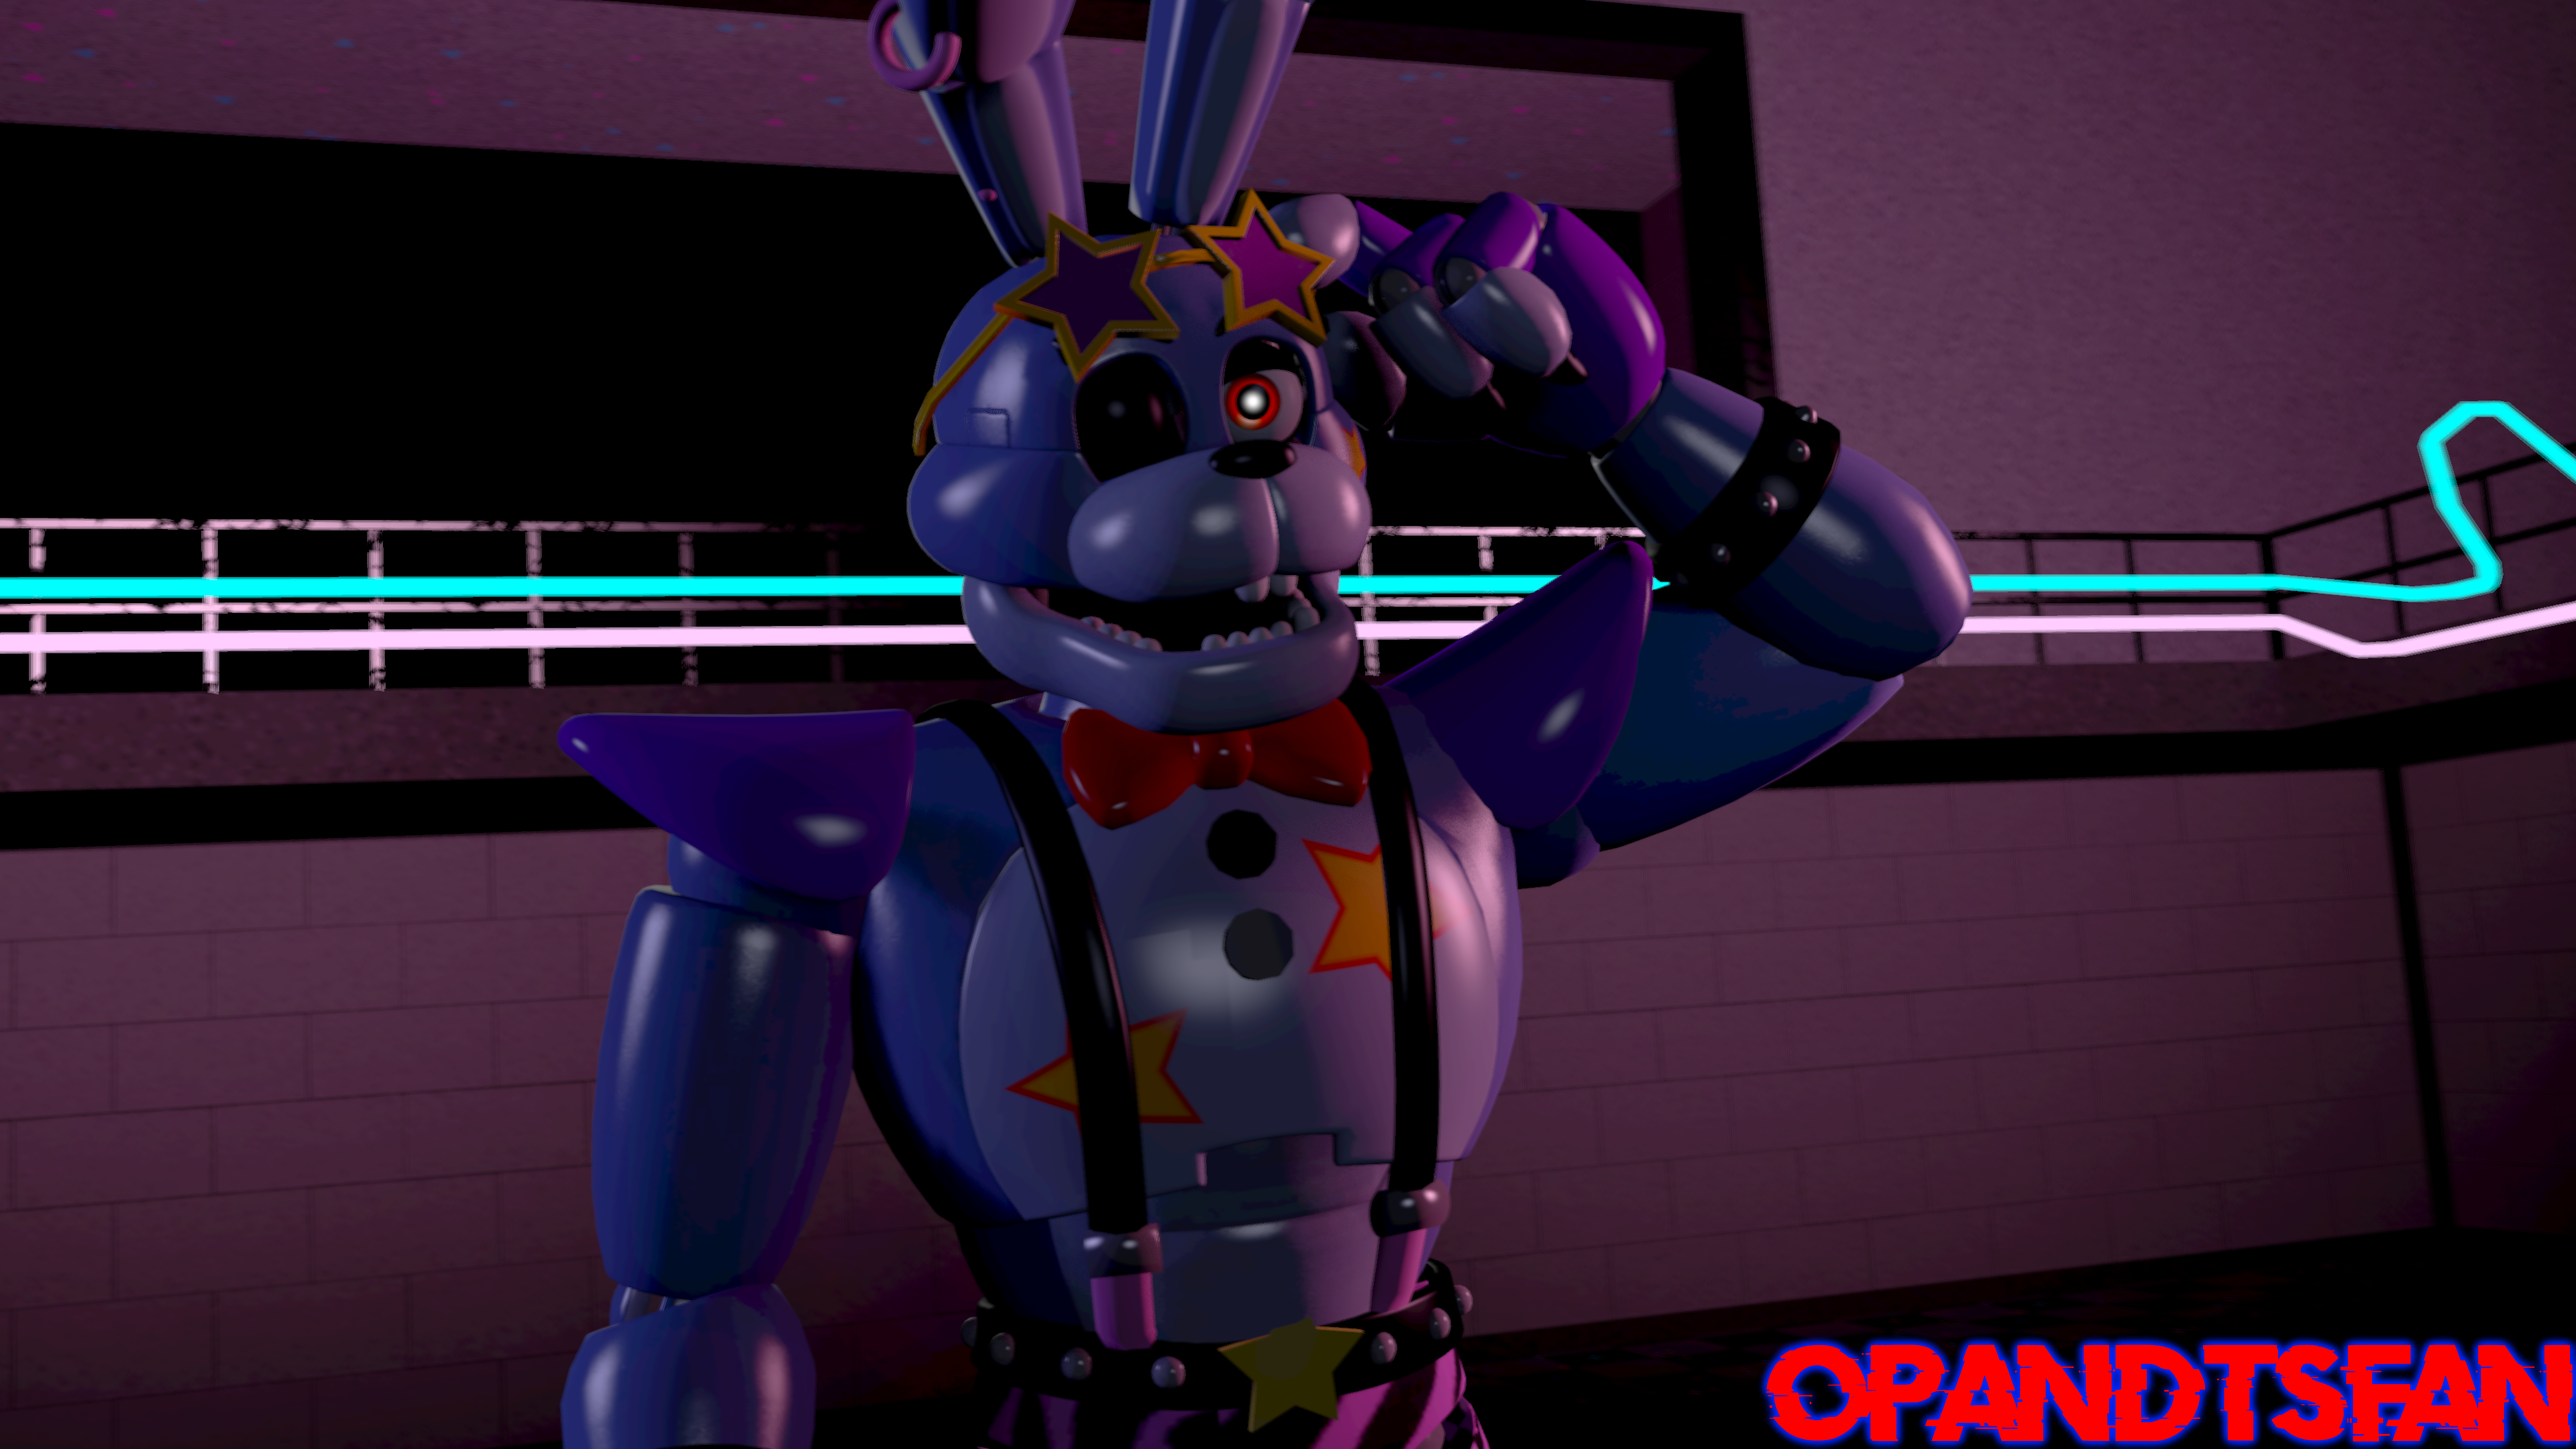 Presenting Glamrock Bonnie, now in full! (Model by Me) : r